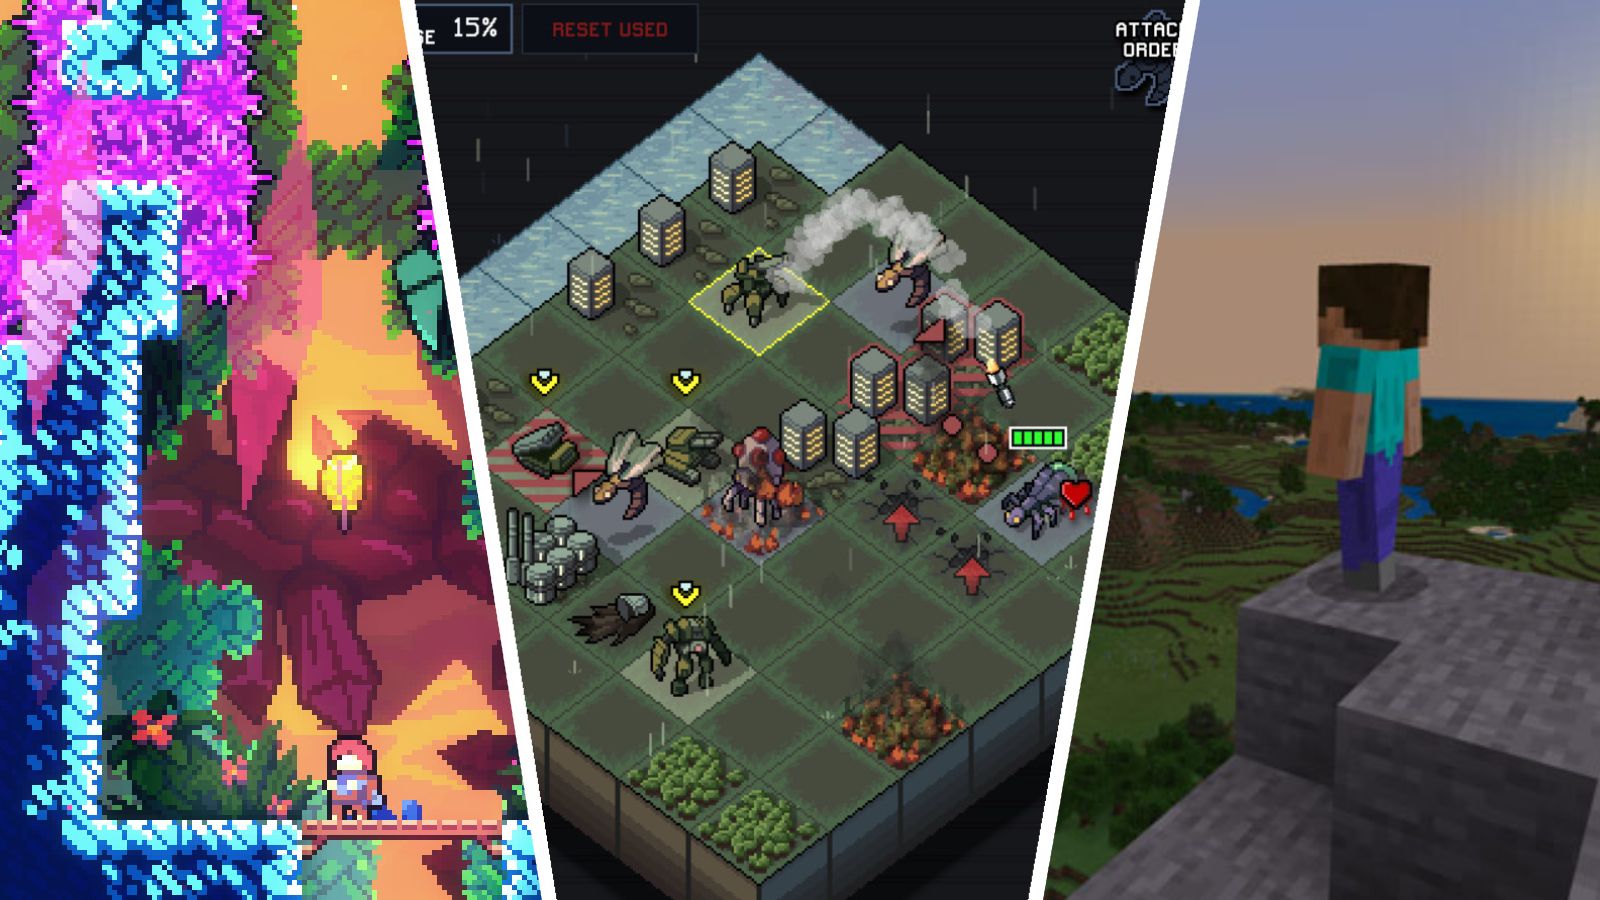 Screenshots of Celeste, Into the Breach, and Minecraft in a collage